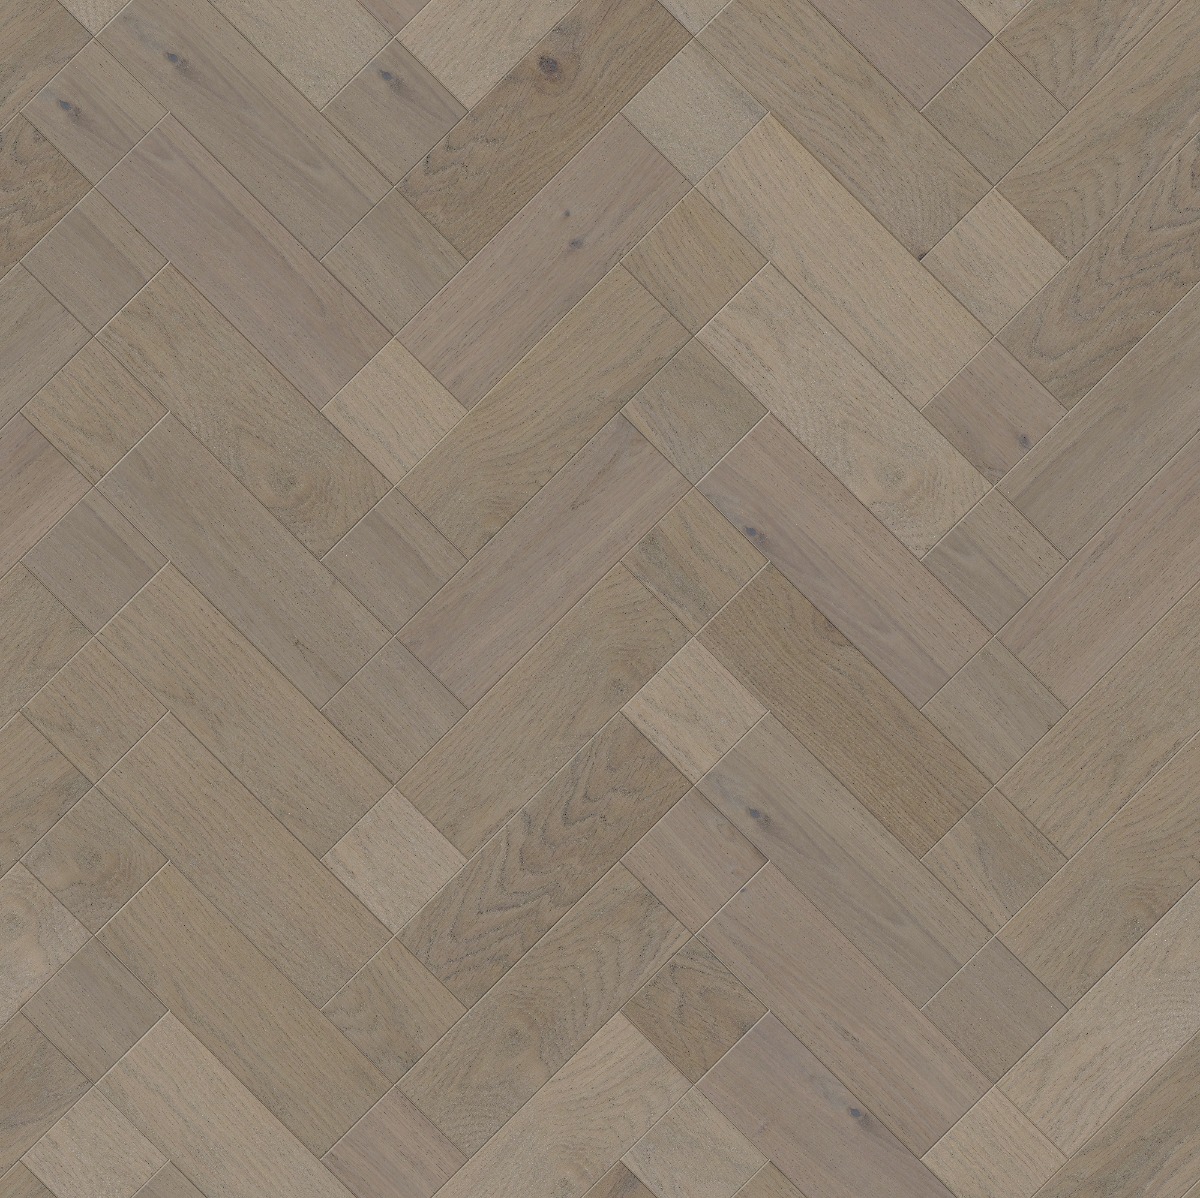 A seamless wood texture with creative 4230 character grade boards arranged in a  pattern